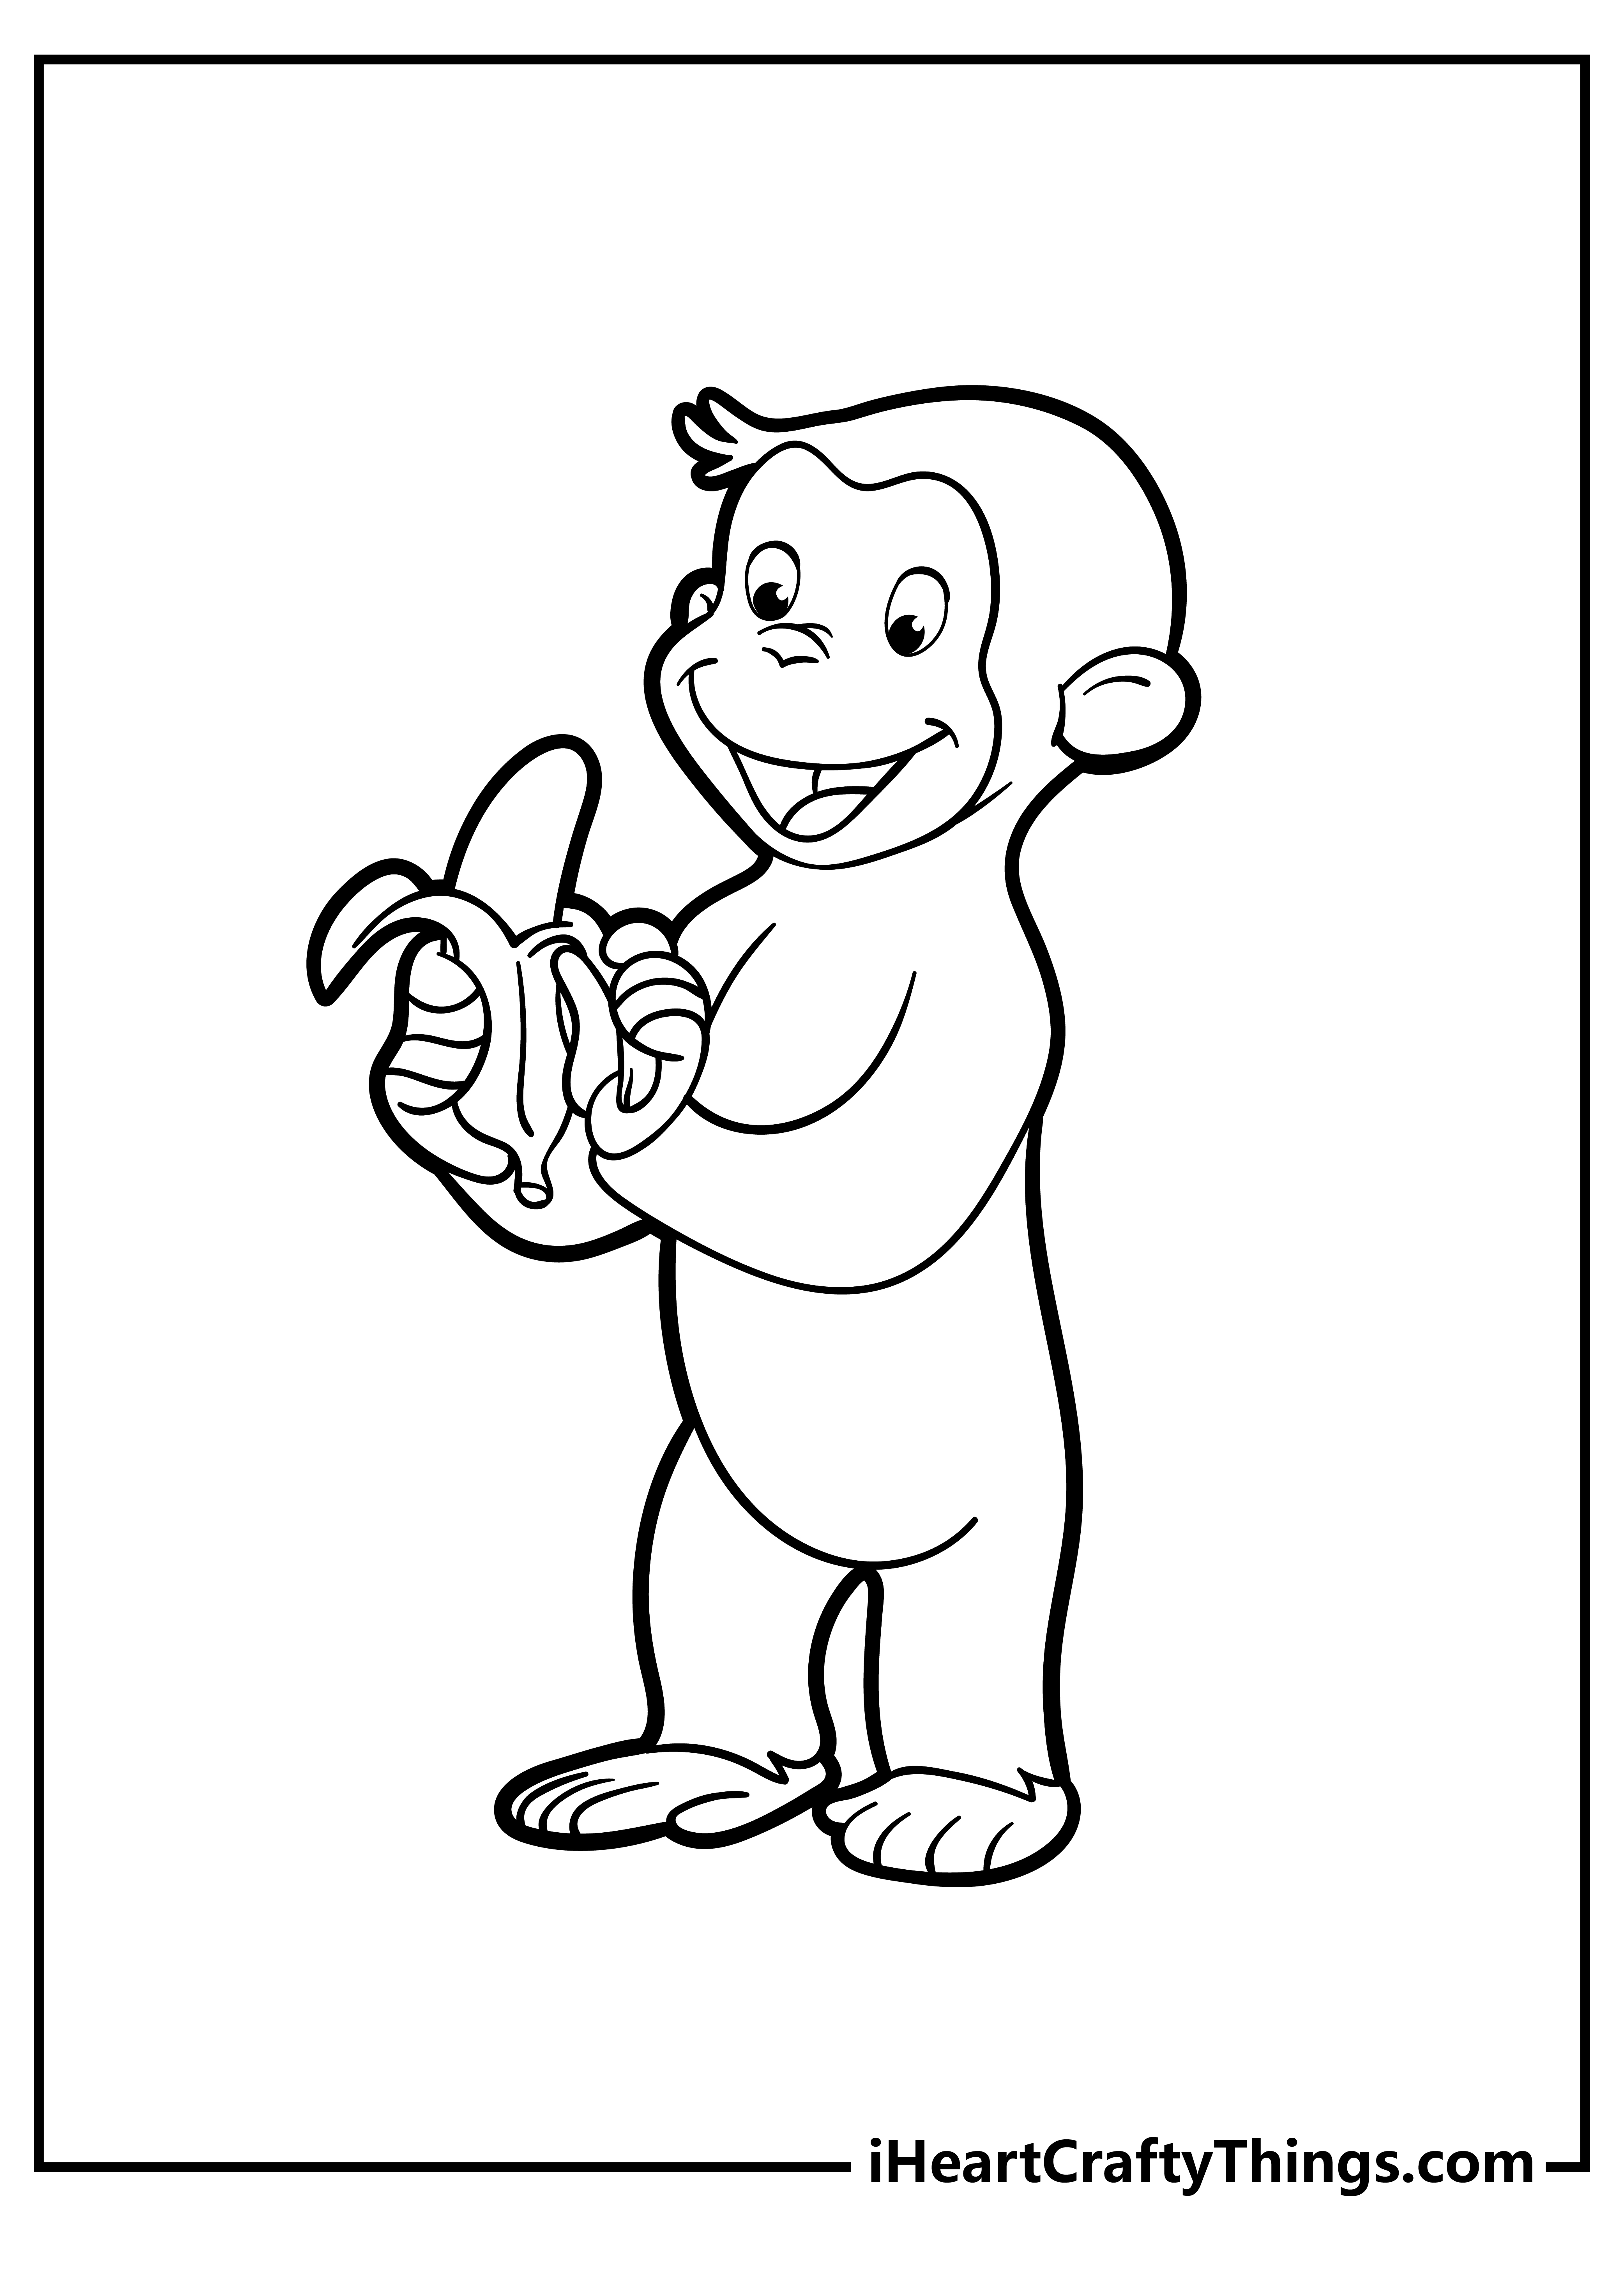 Curious George Coloring Pages for kids free download